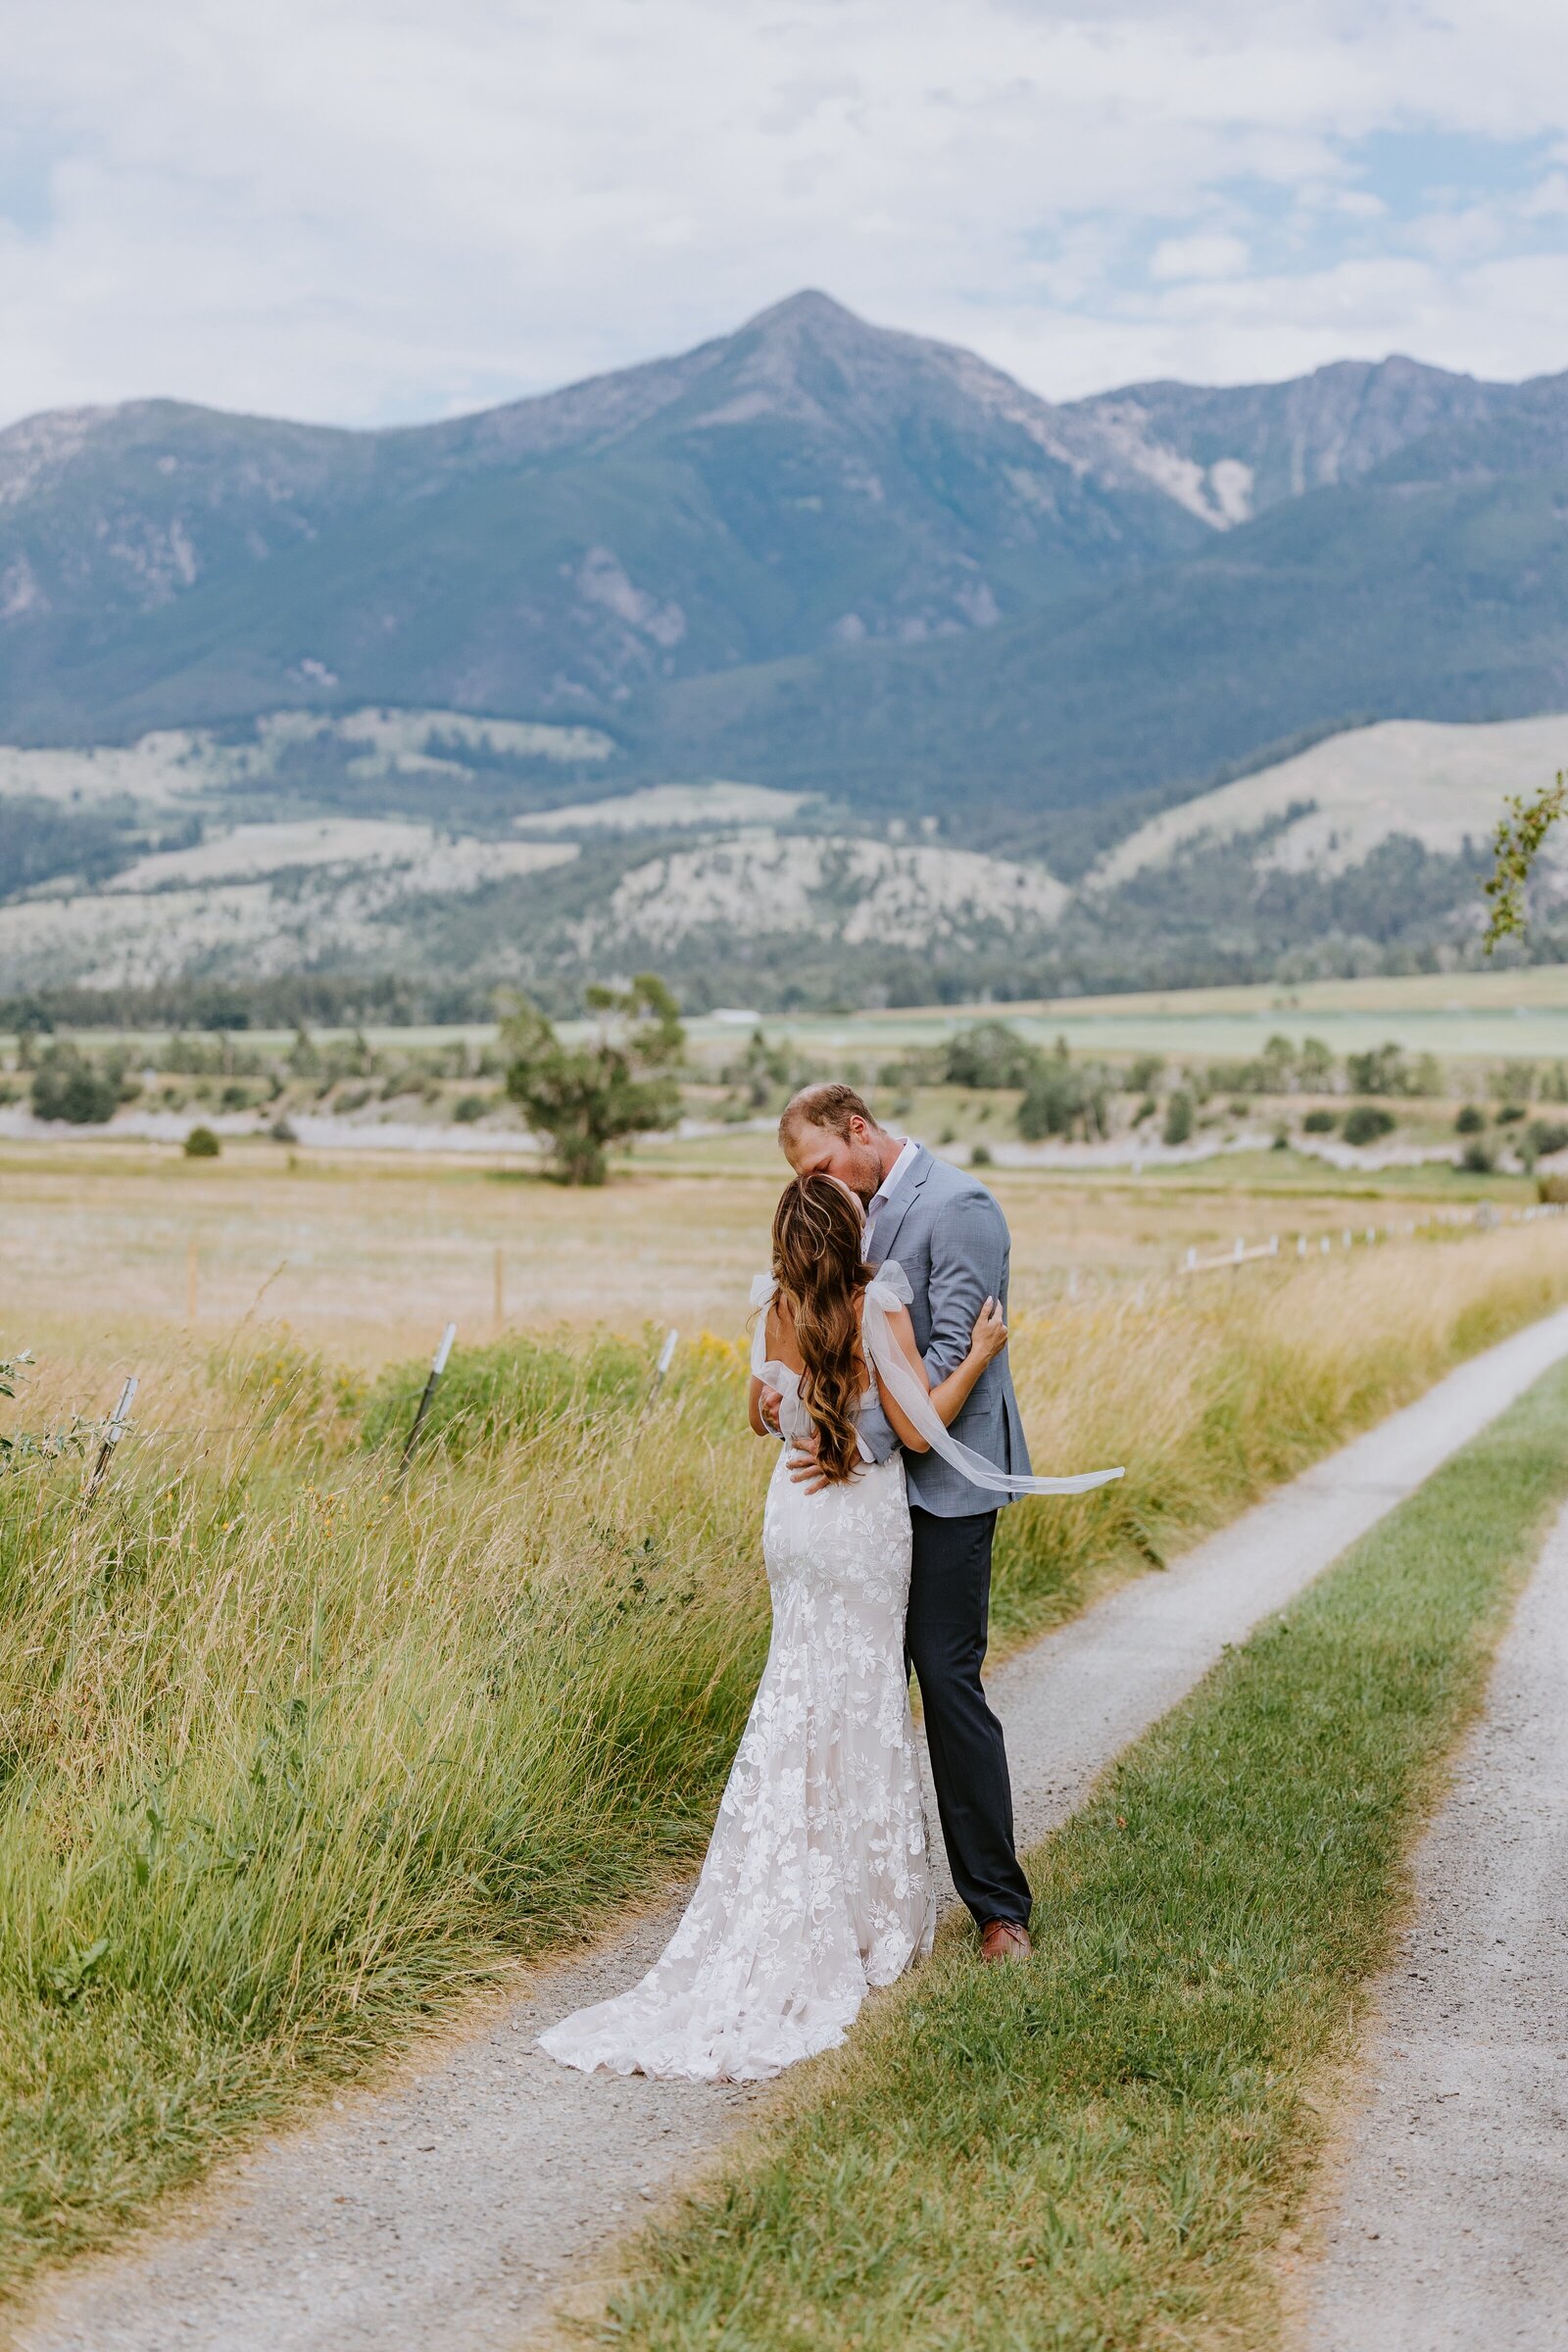 Couple kiss as they walk down a dirt road in Bozeman.